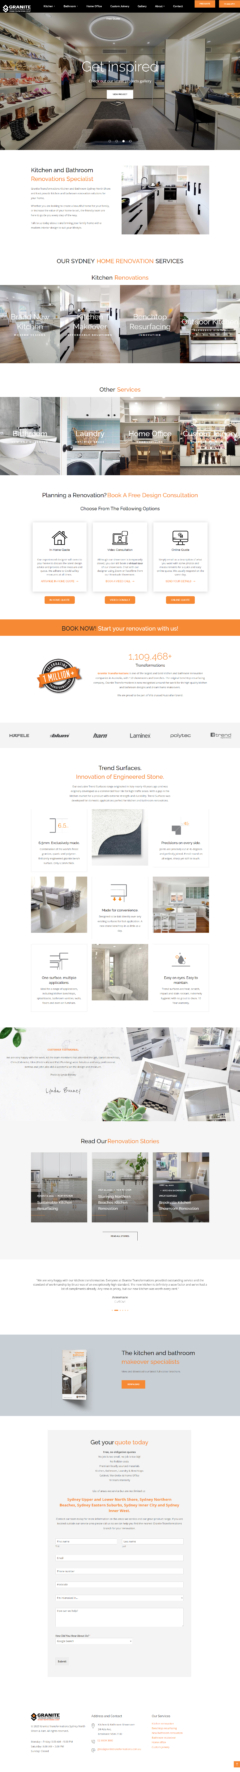 Gtkitchen real estate about page